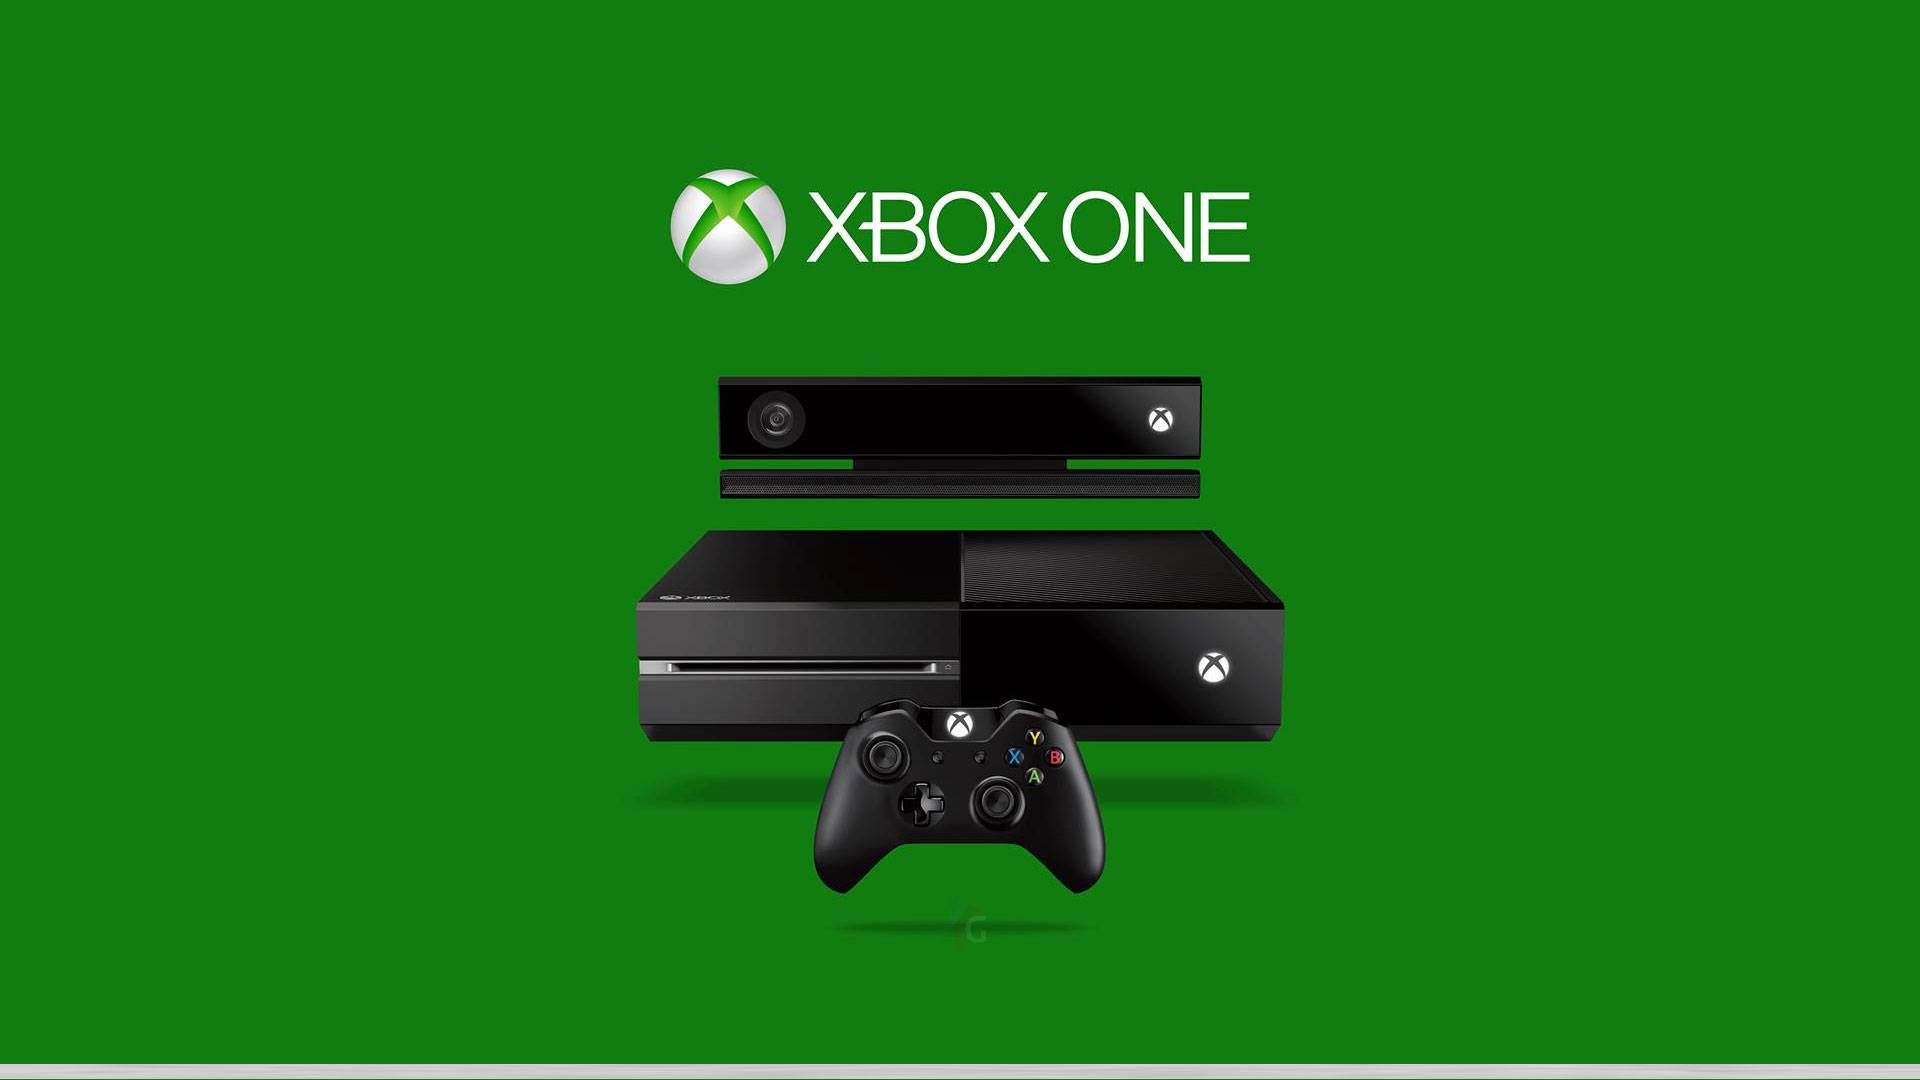 Xbox One Wallpapers in HD - Xbox Live Wallpaper